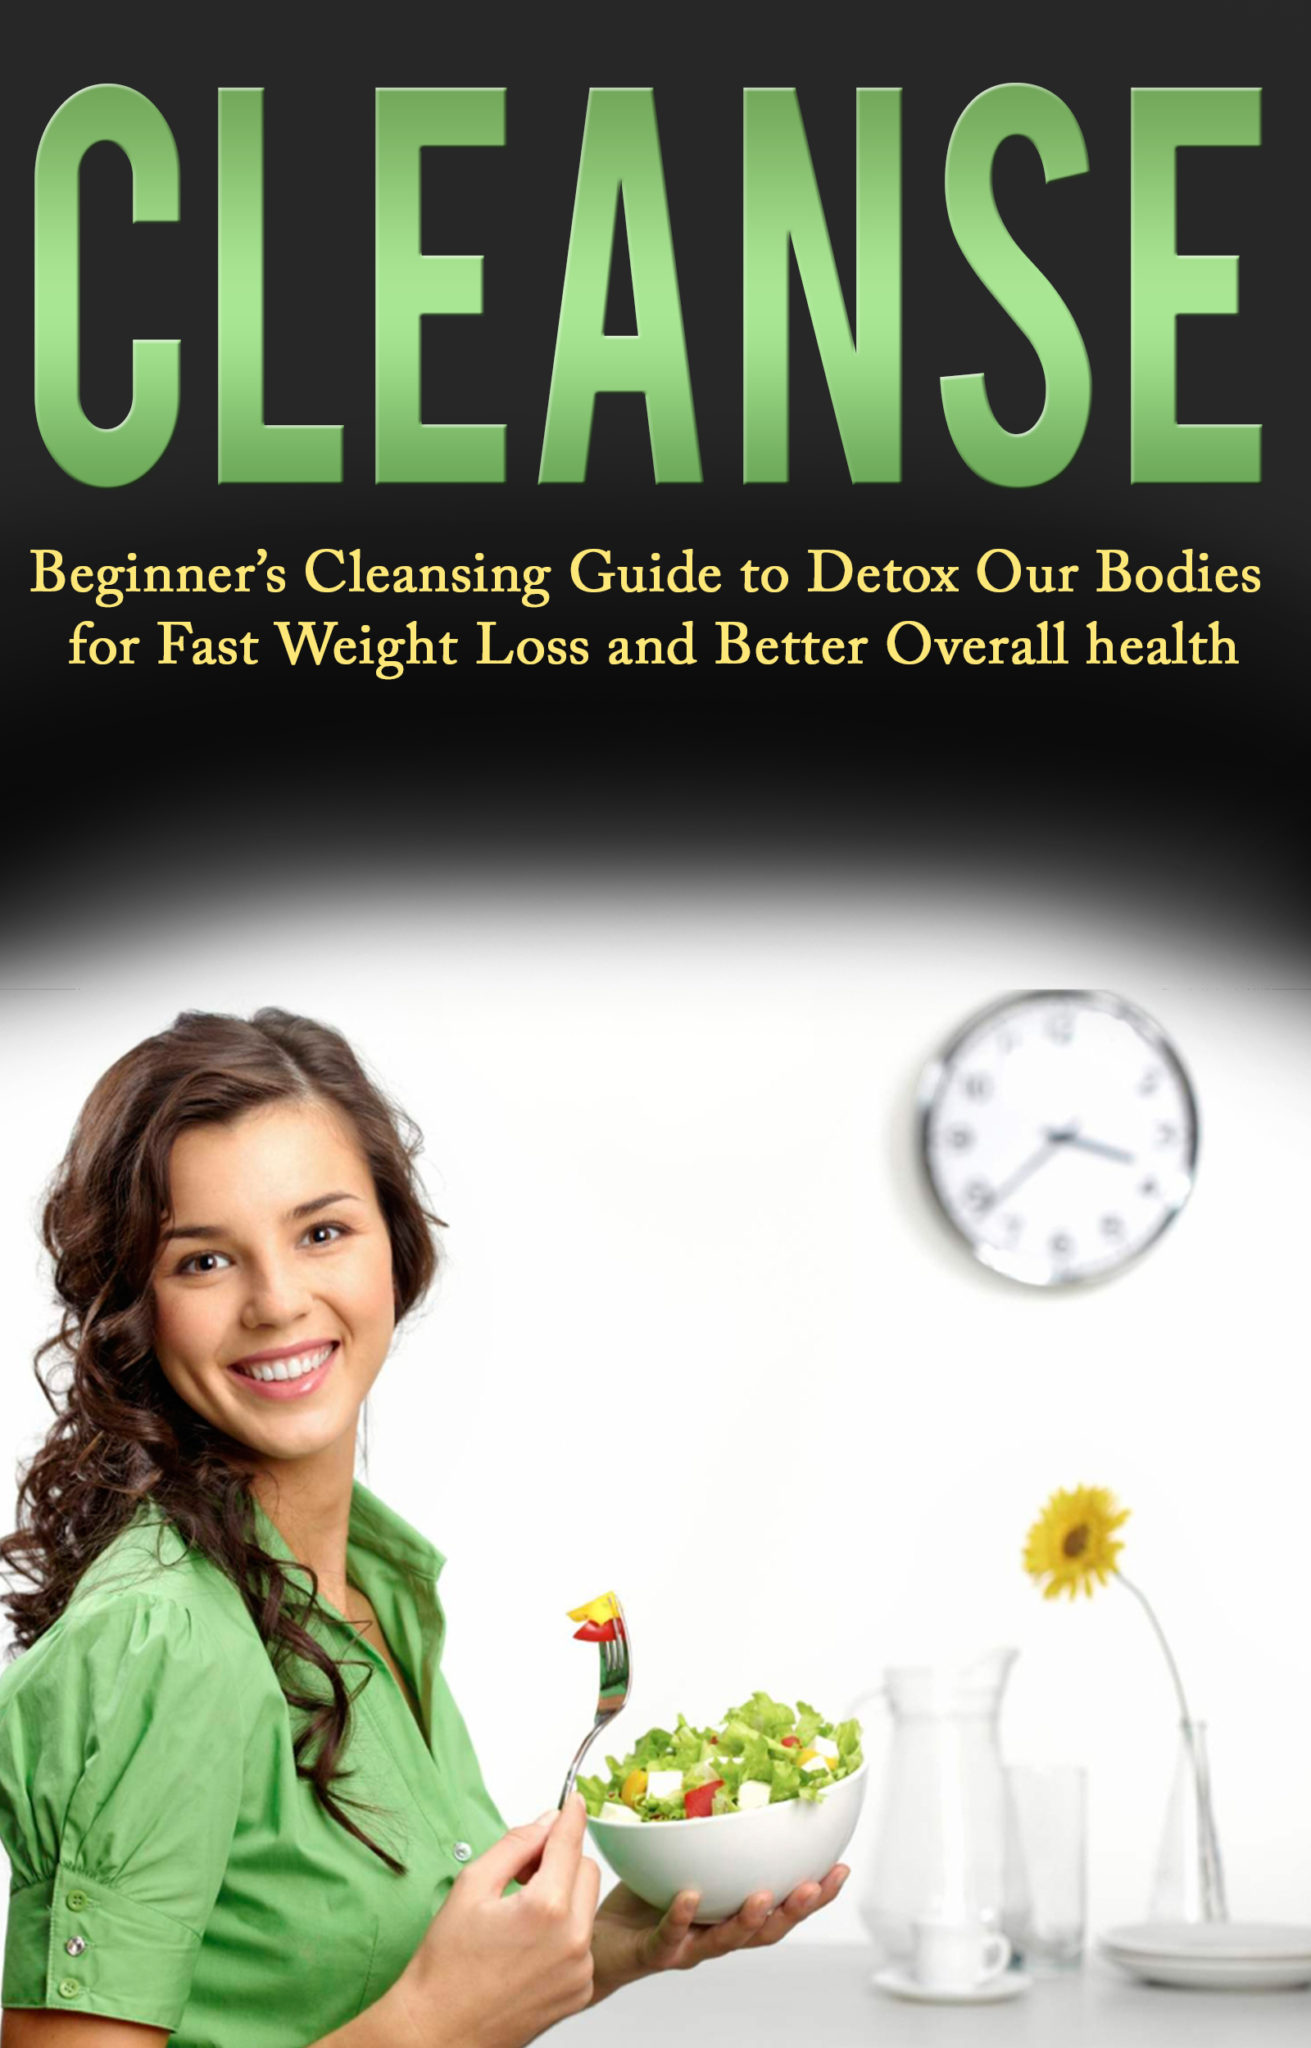 FREE: Cleanse: Beginner’s Cleansing Guide to Detox Our Bodies for Fast Weight Loss and Better Overall health by Kim Anthony